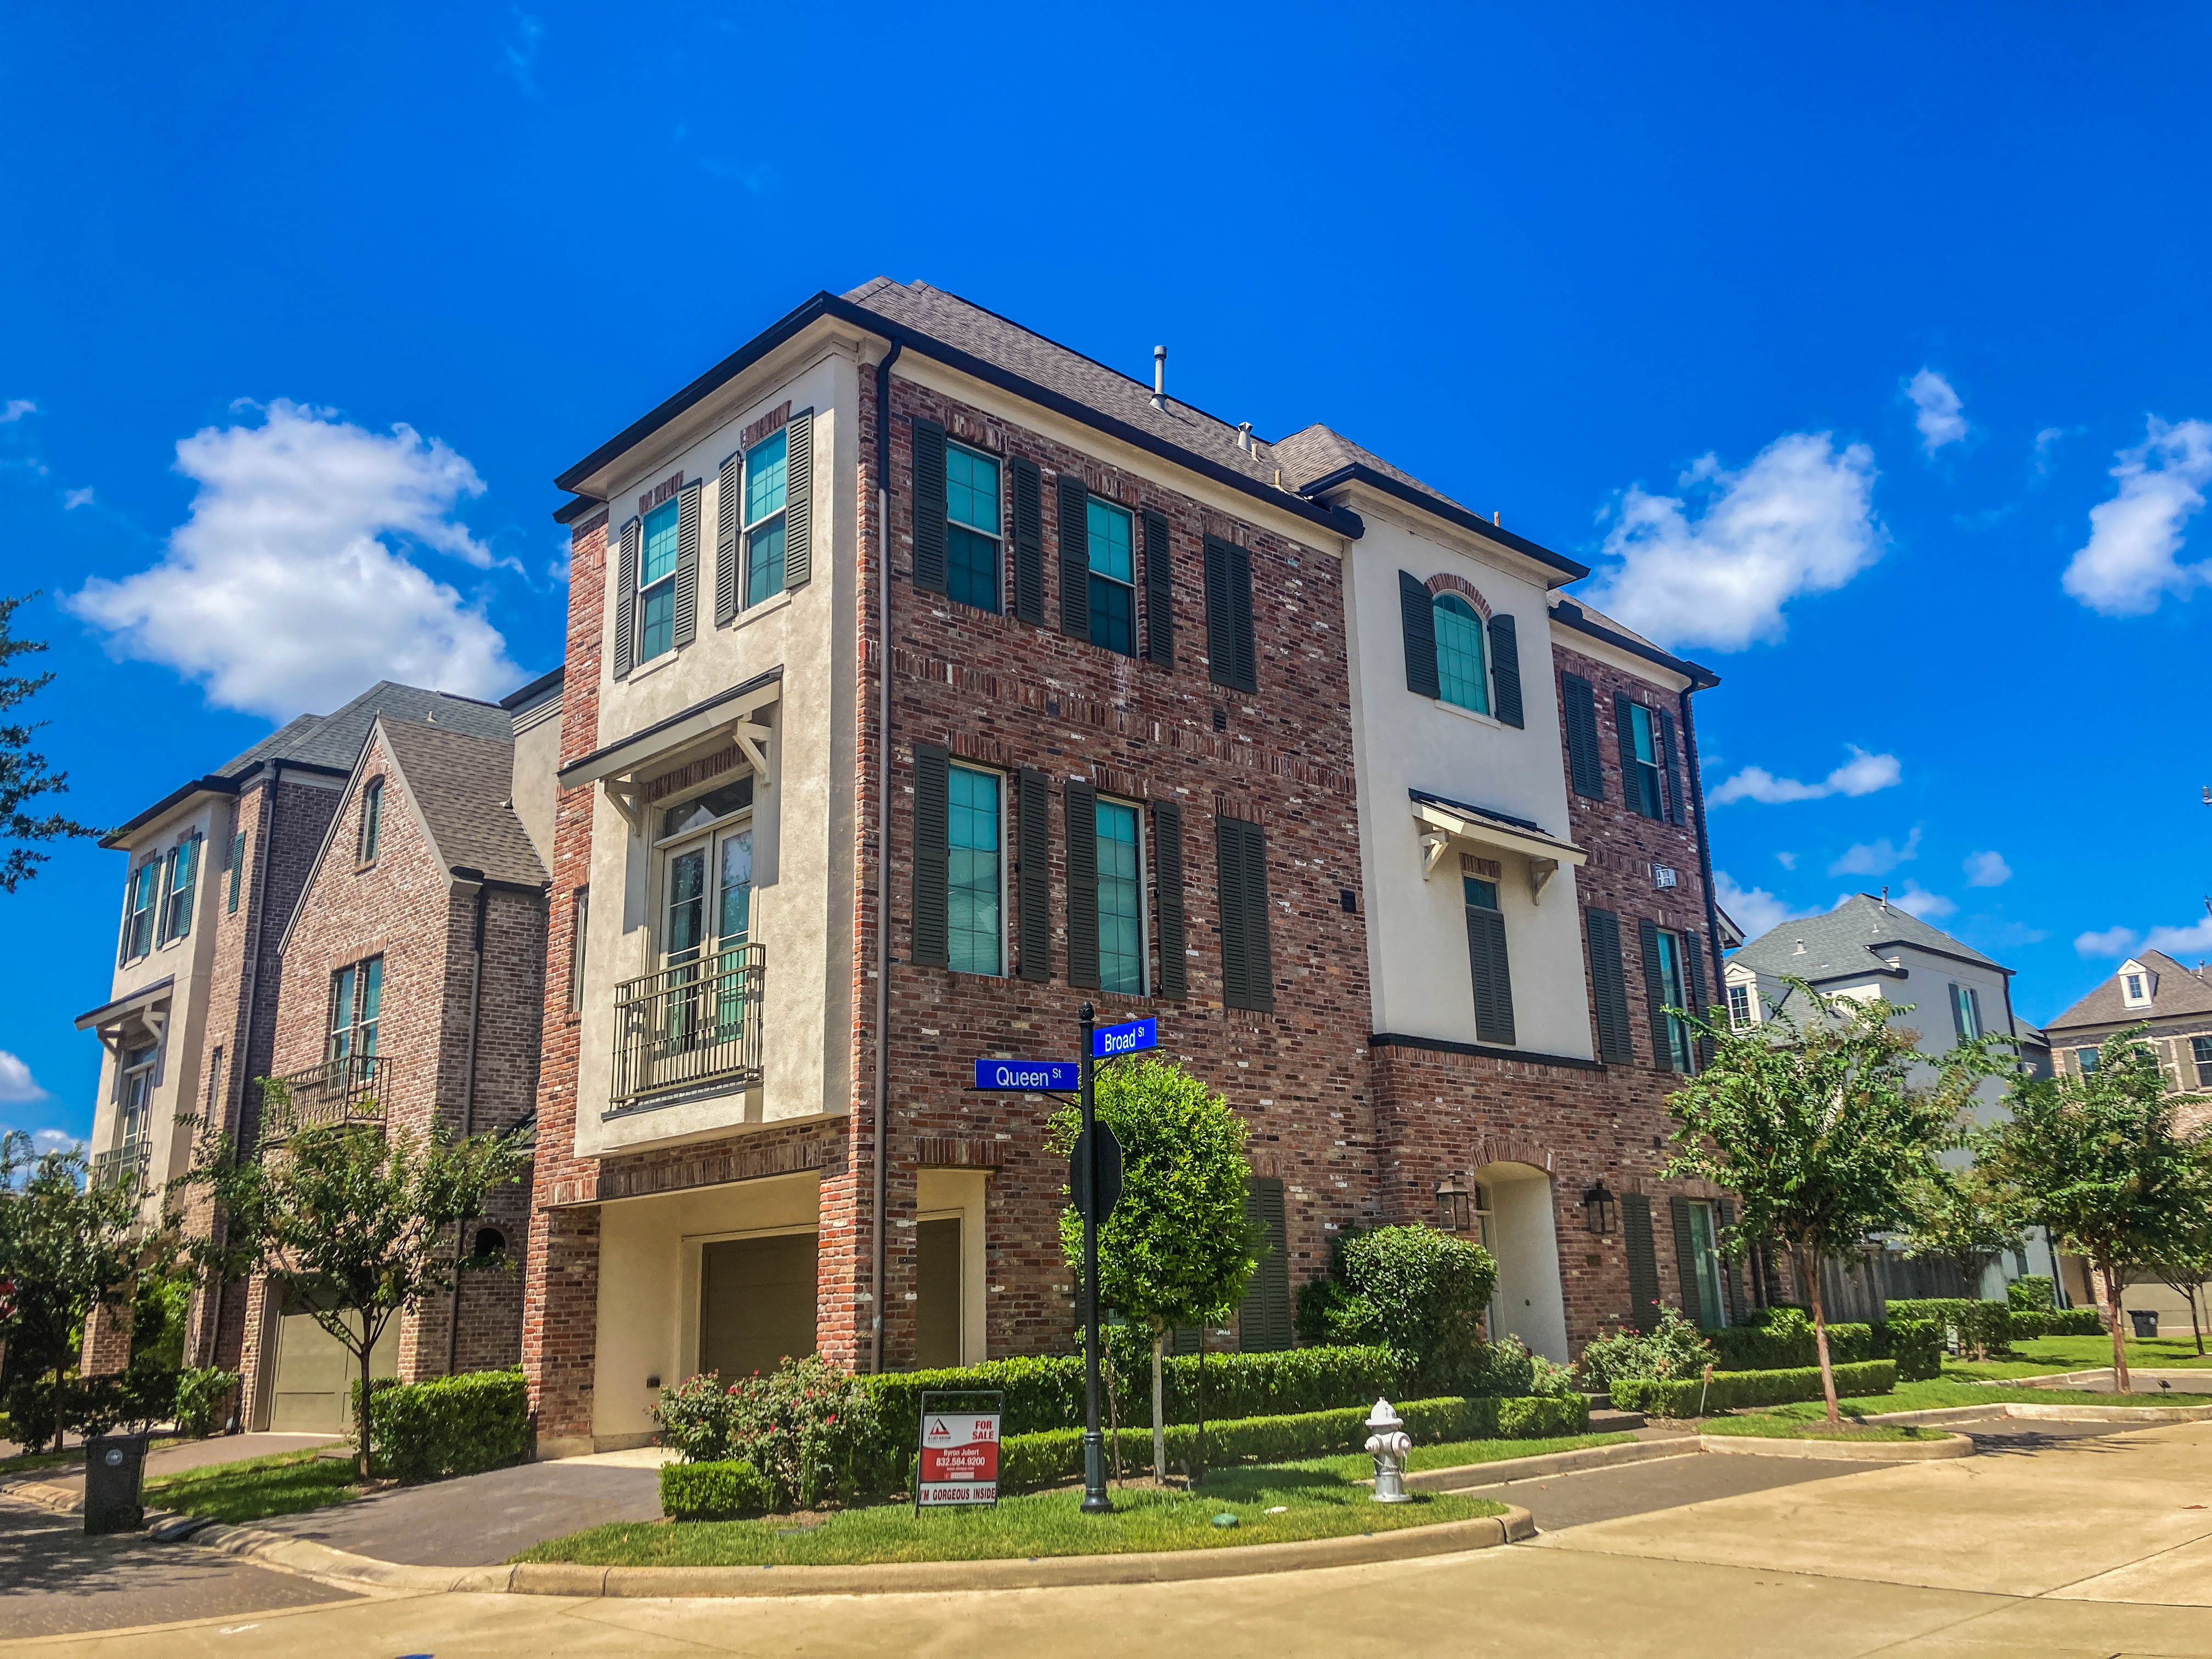 HOUSTON TOWNHOME ROOF
INSPECTIONS